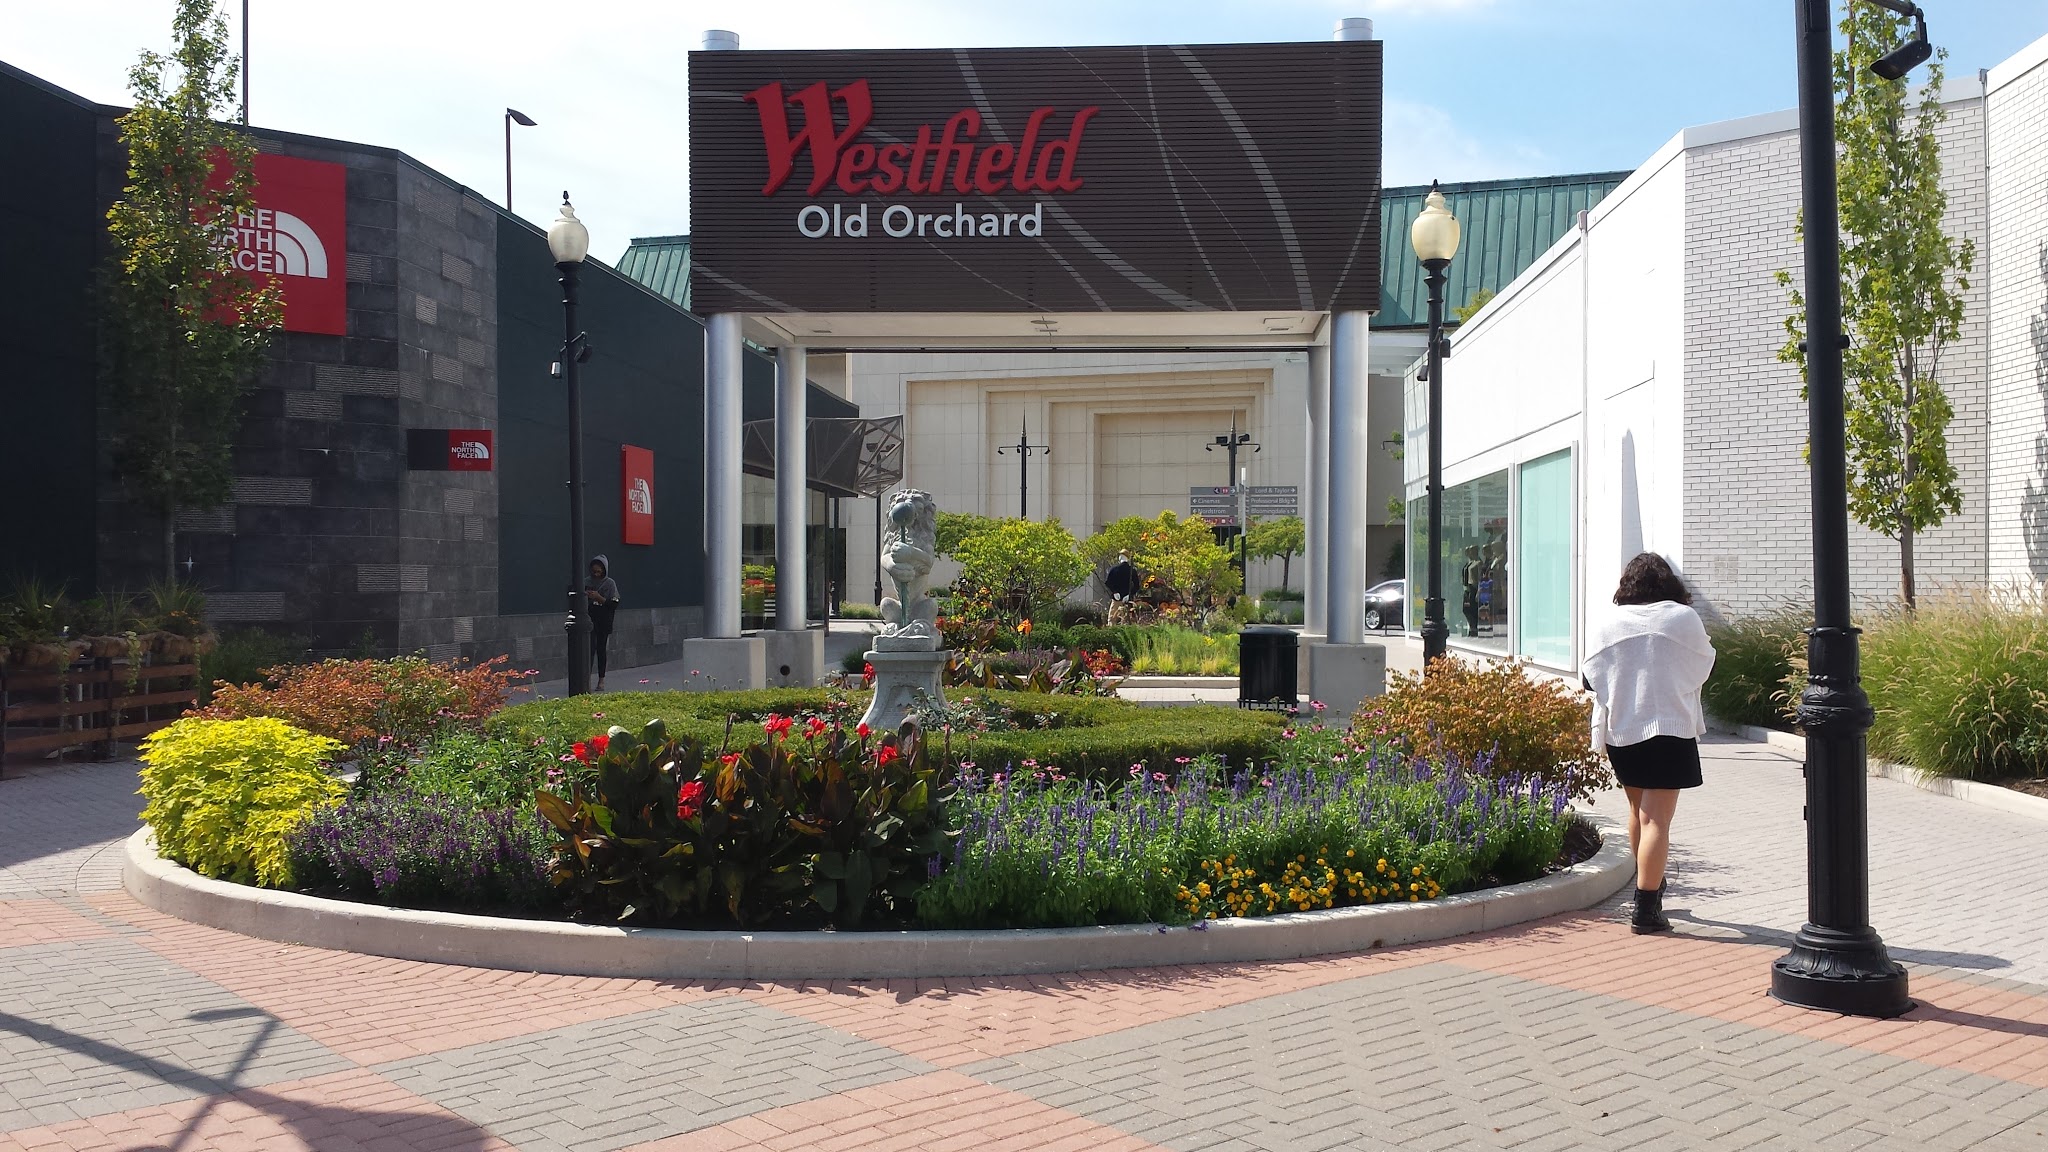 Old Orchard/Westfield mall - Review of Westfield Old Orchard Center, Skokie,  IL - Tripadvisor